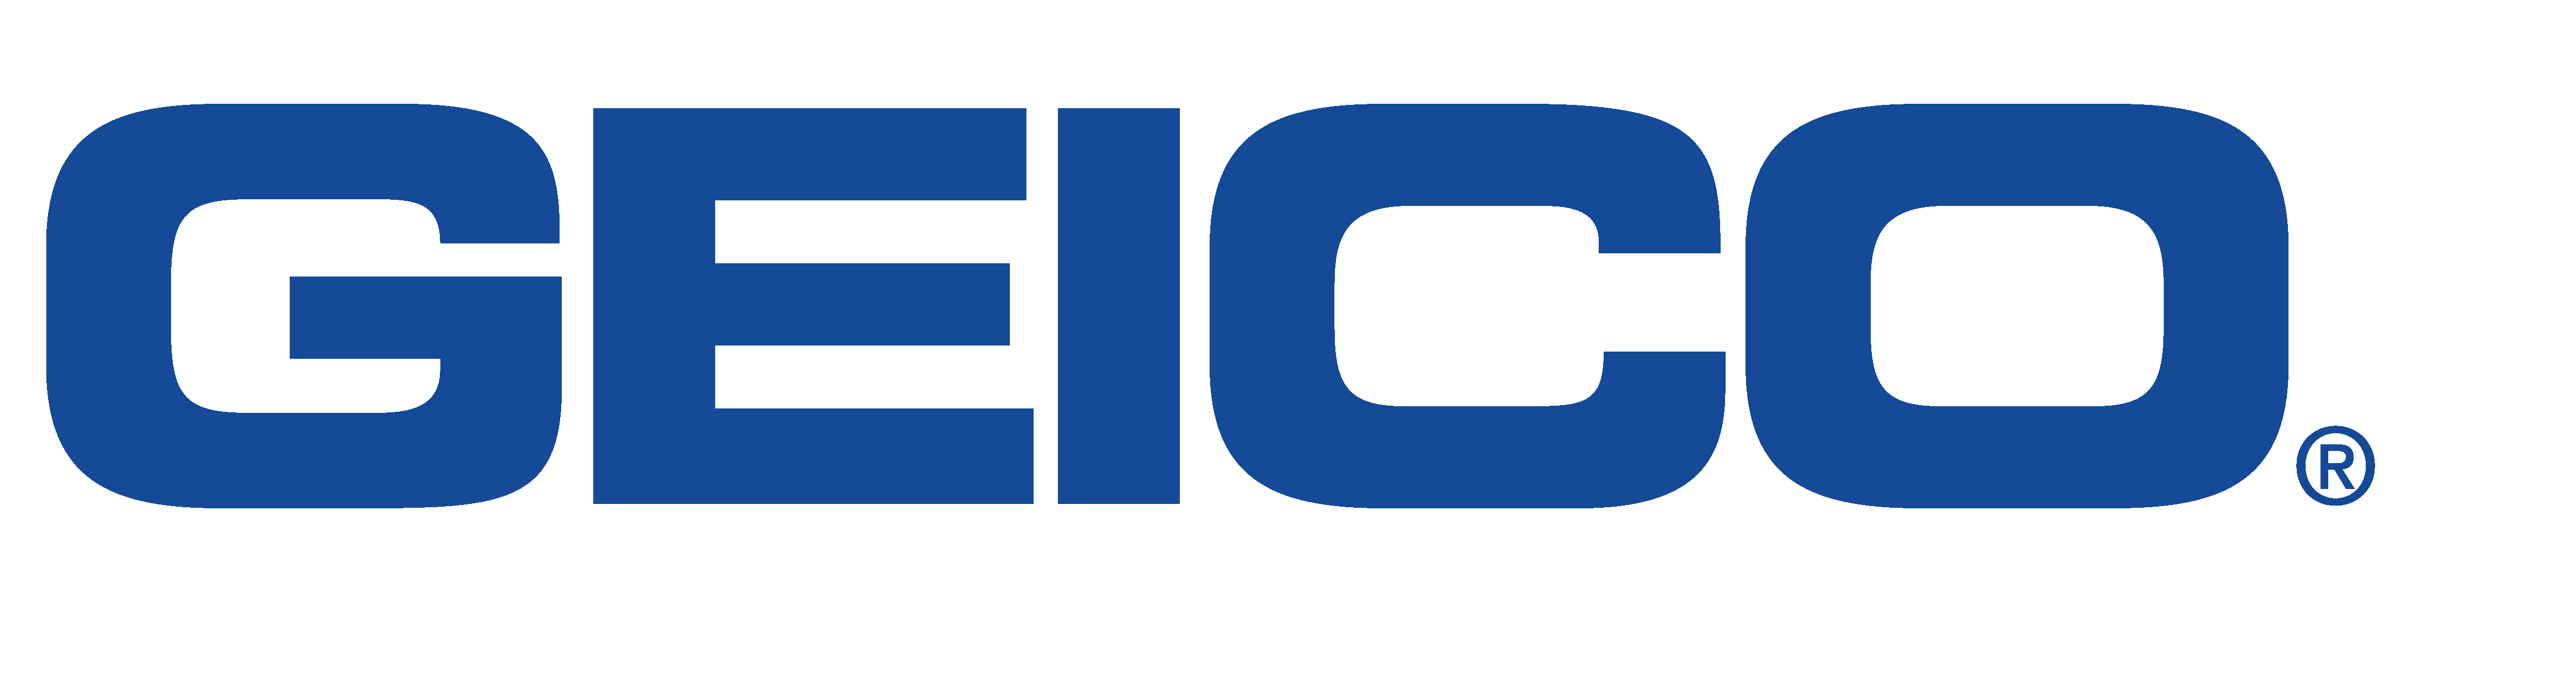 Gieco Logo - GEICO Logo for Sponsors - Edited Version if Needed | EAC Network